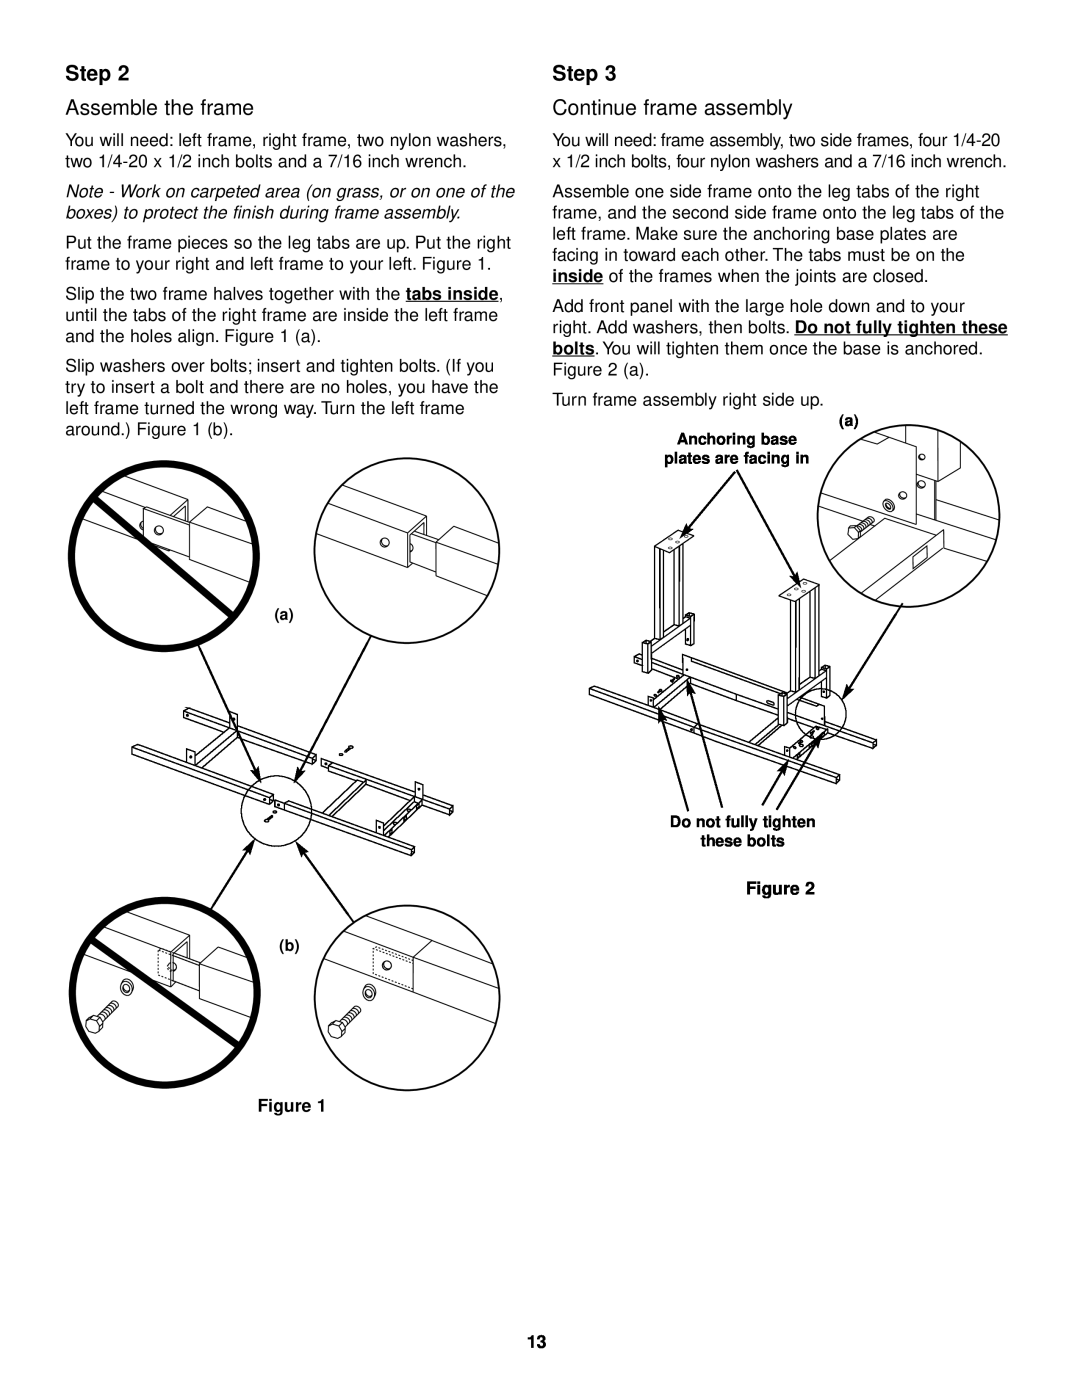 Weber 3500 owner manual Step, Assemble the frame, Continue frame assembly 